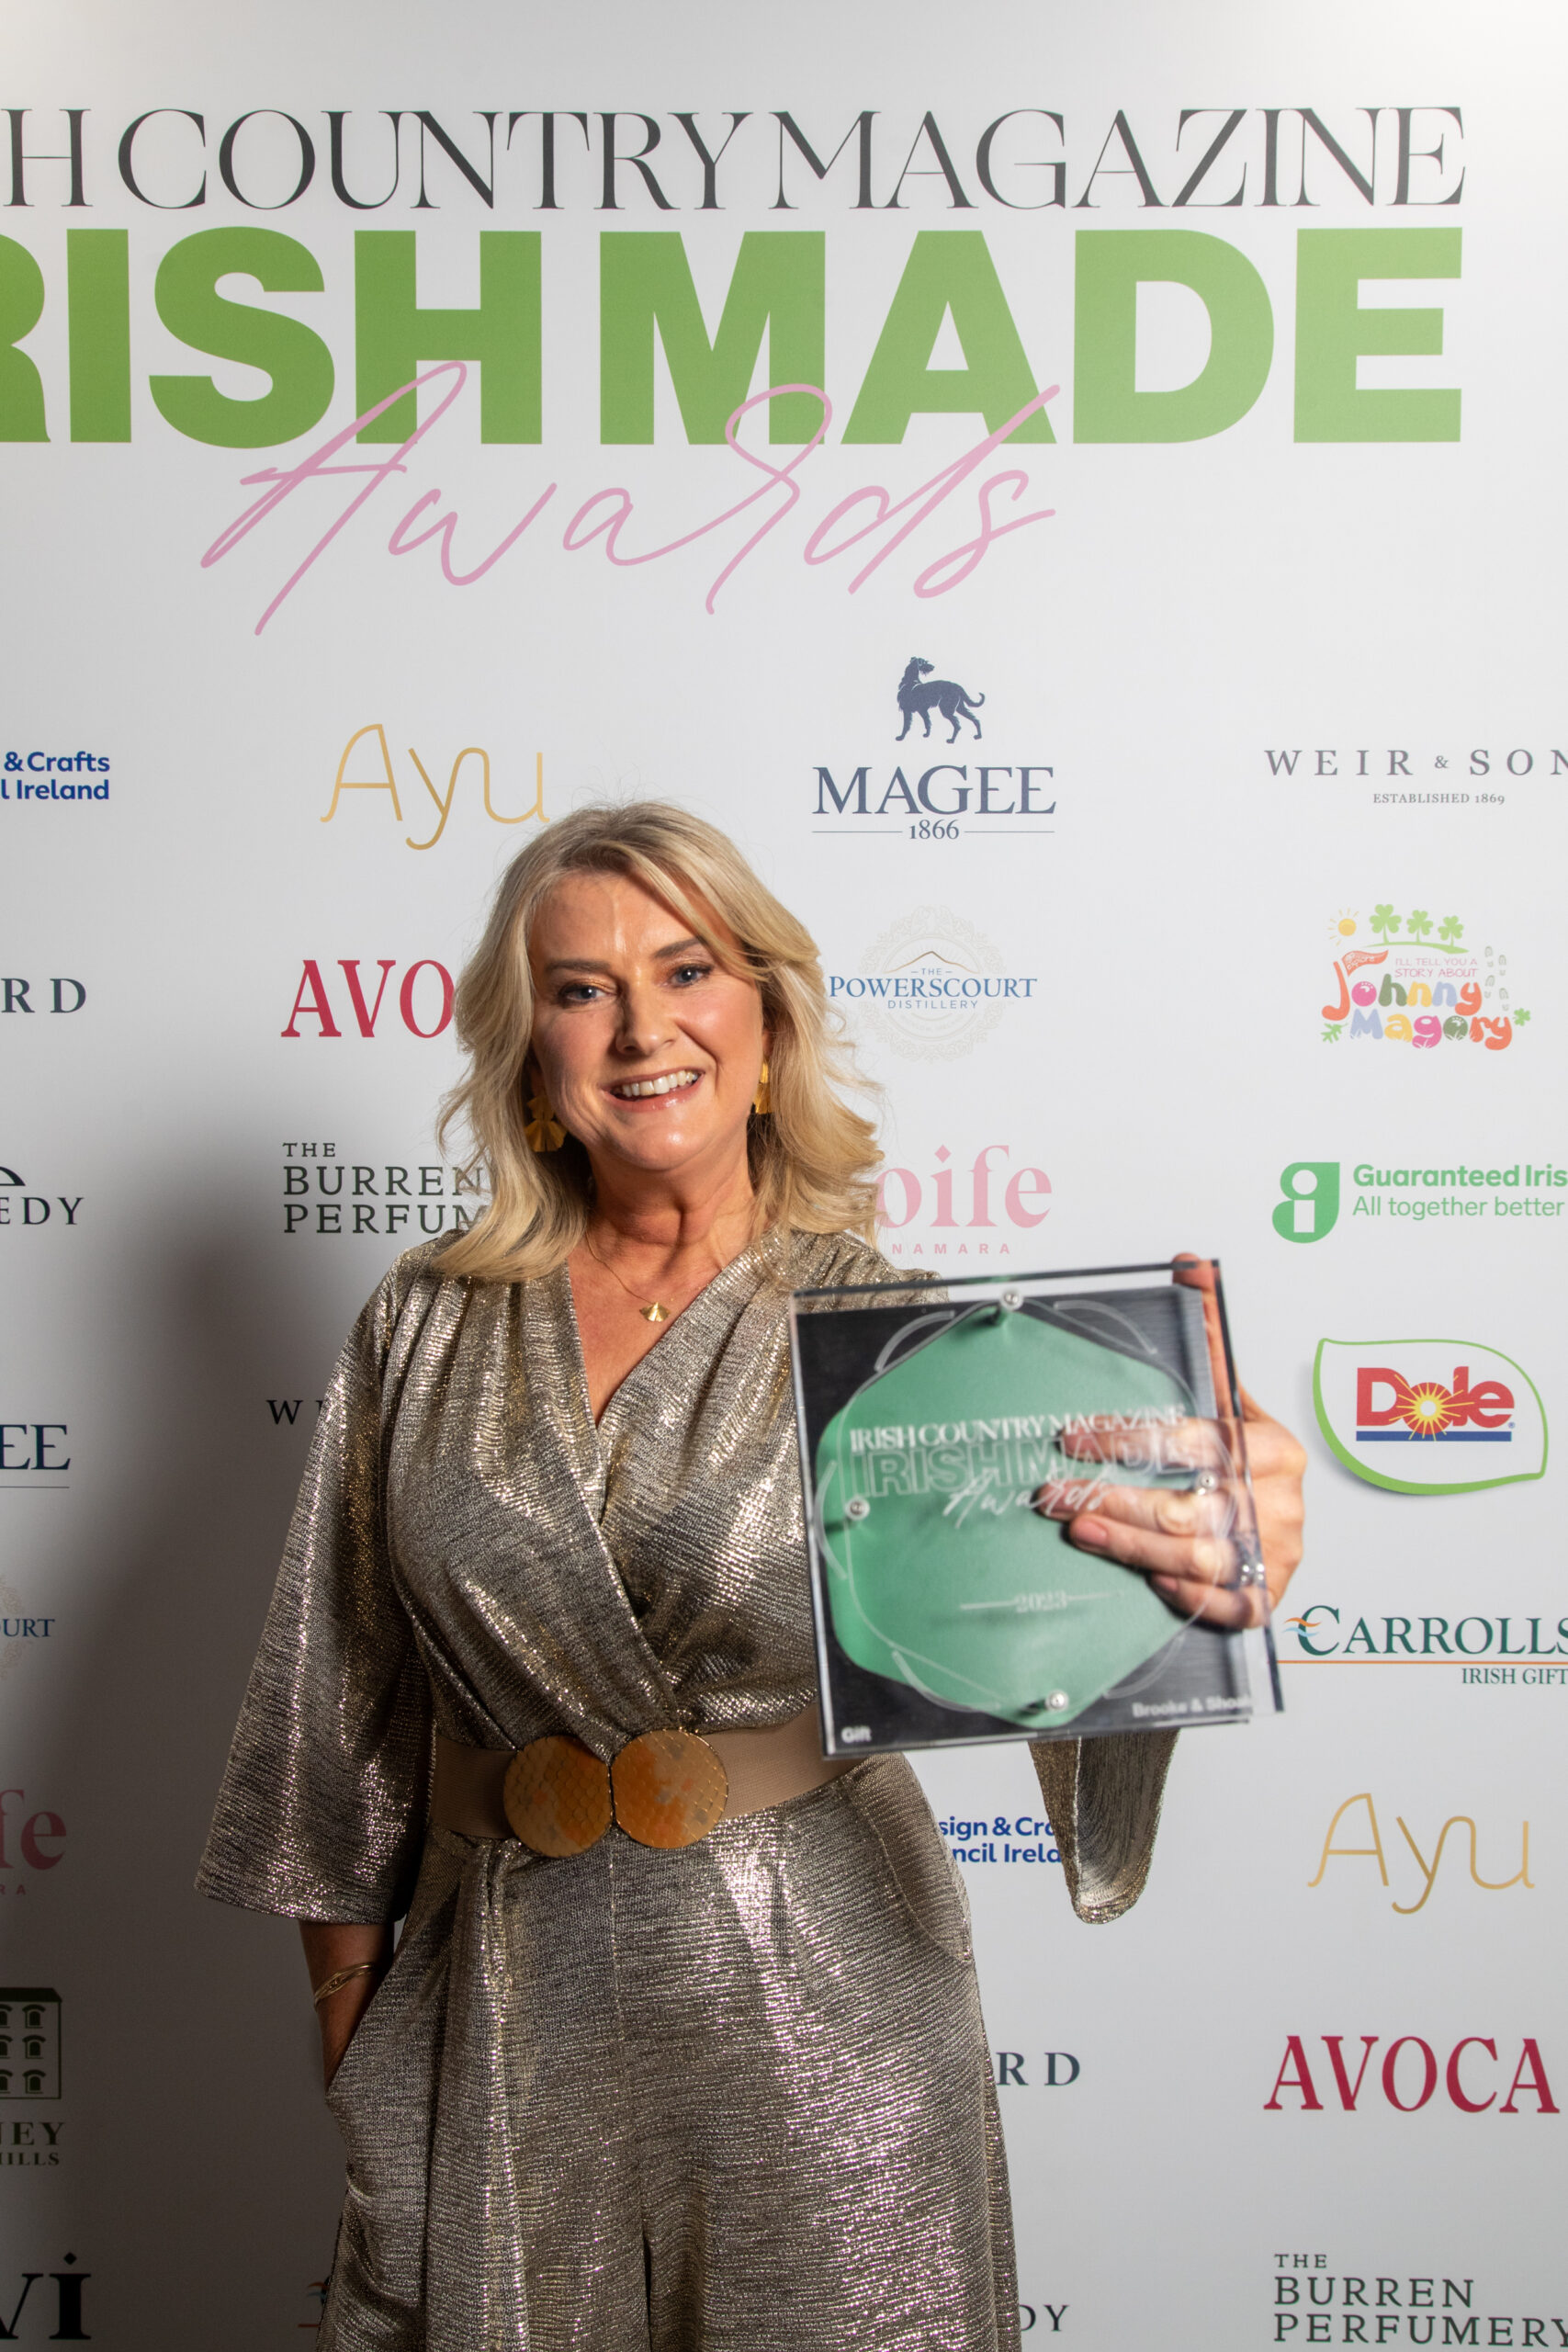 Refresh your memory and check out the Irish makers who came out on top in the past few years of the Irish Made Awards